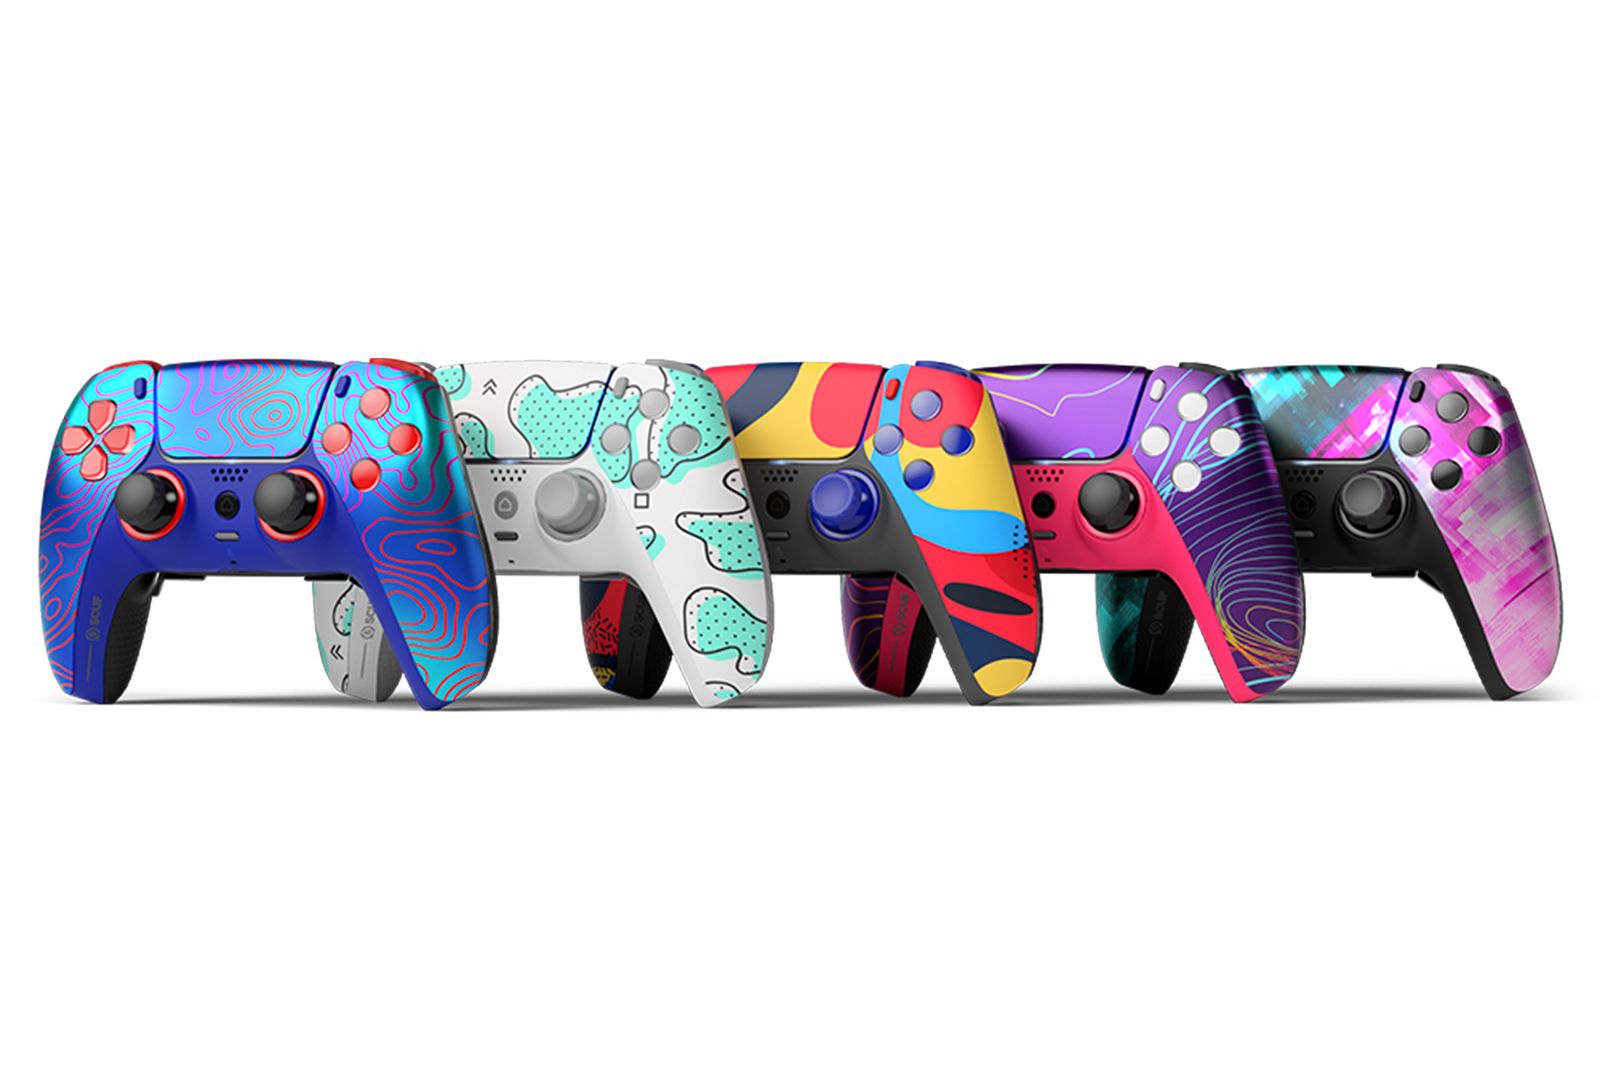 You can now order a fully customised Scuf PS5 controller photo 1